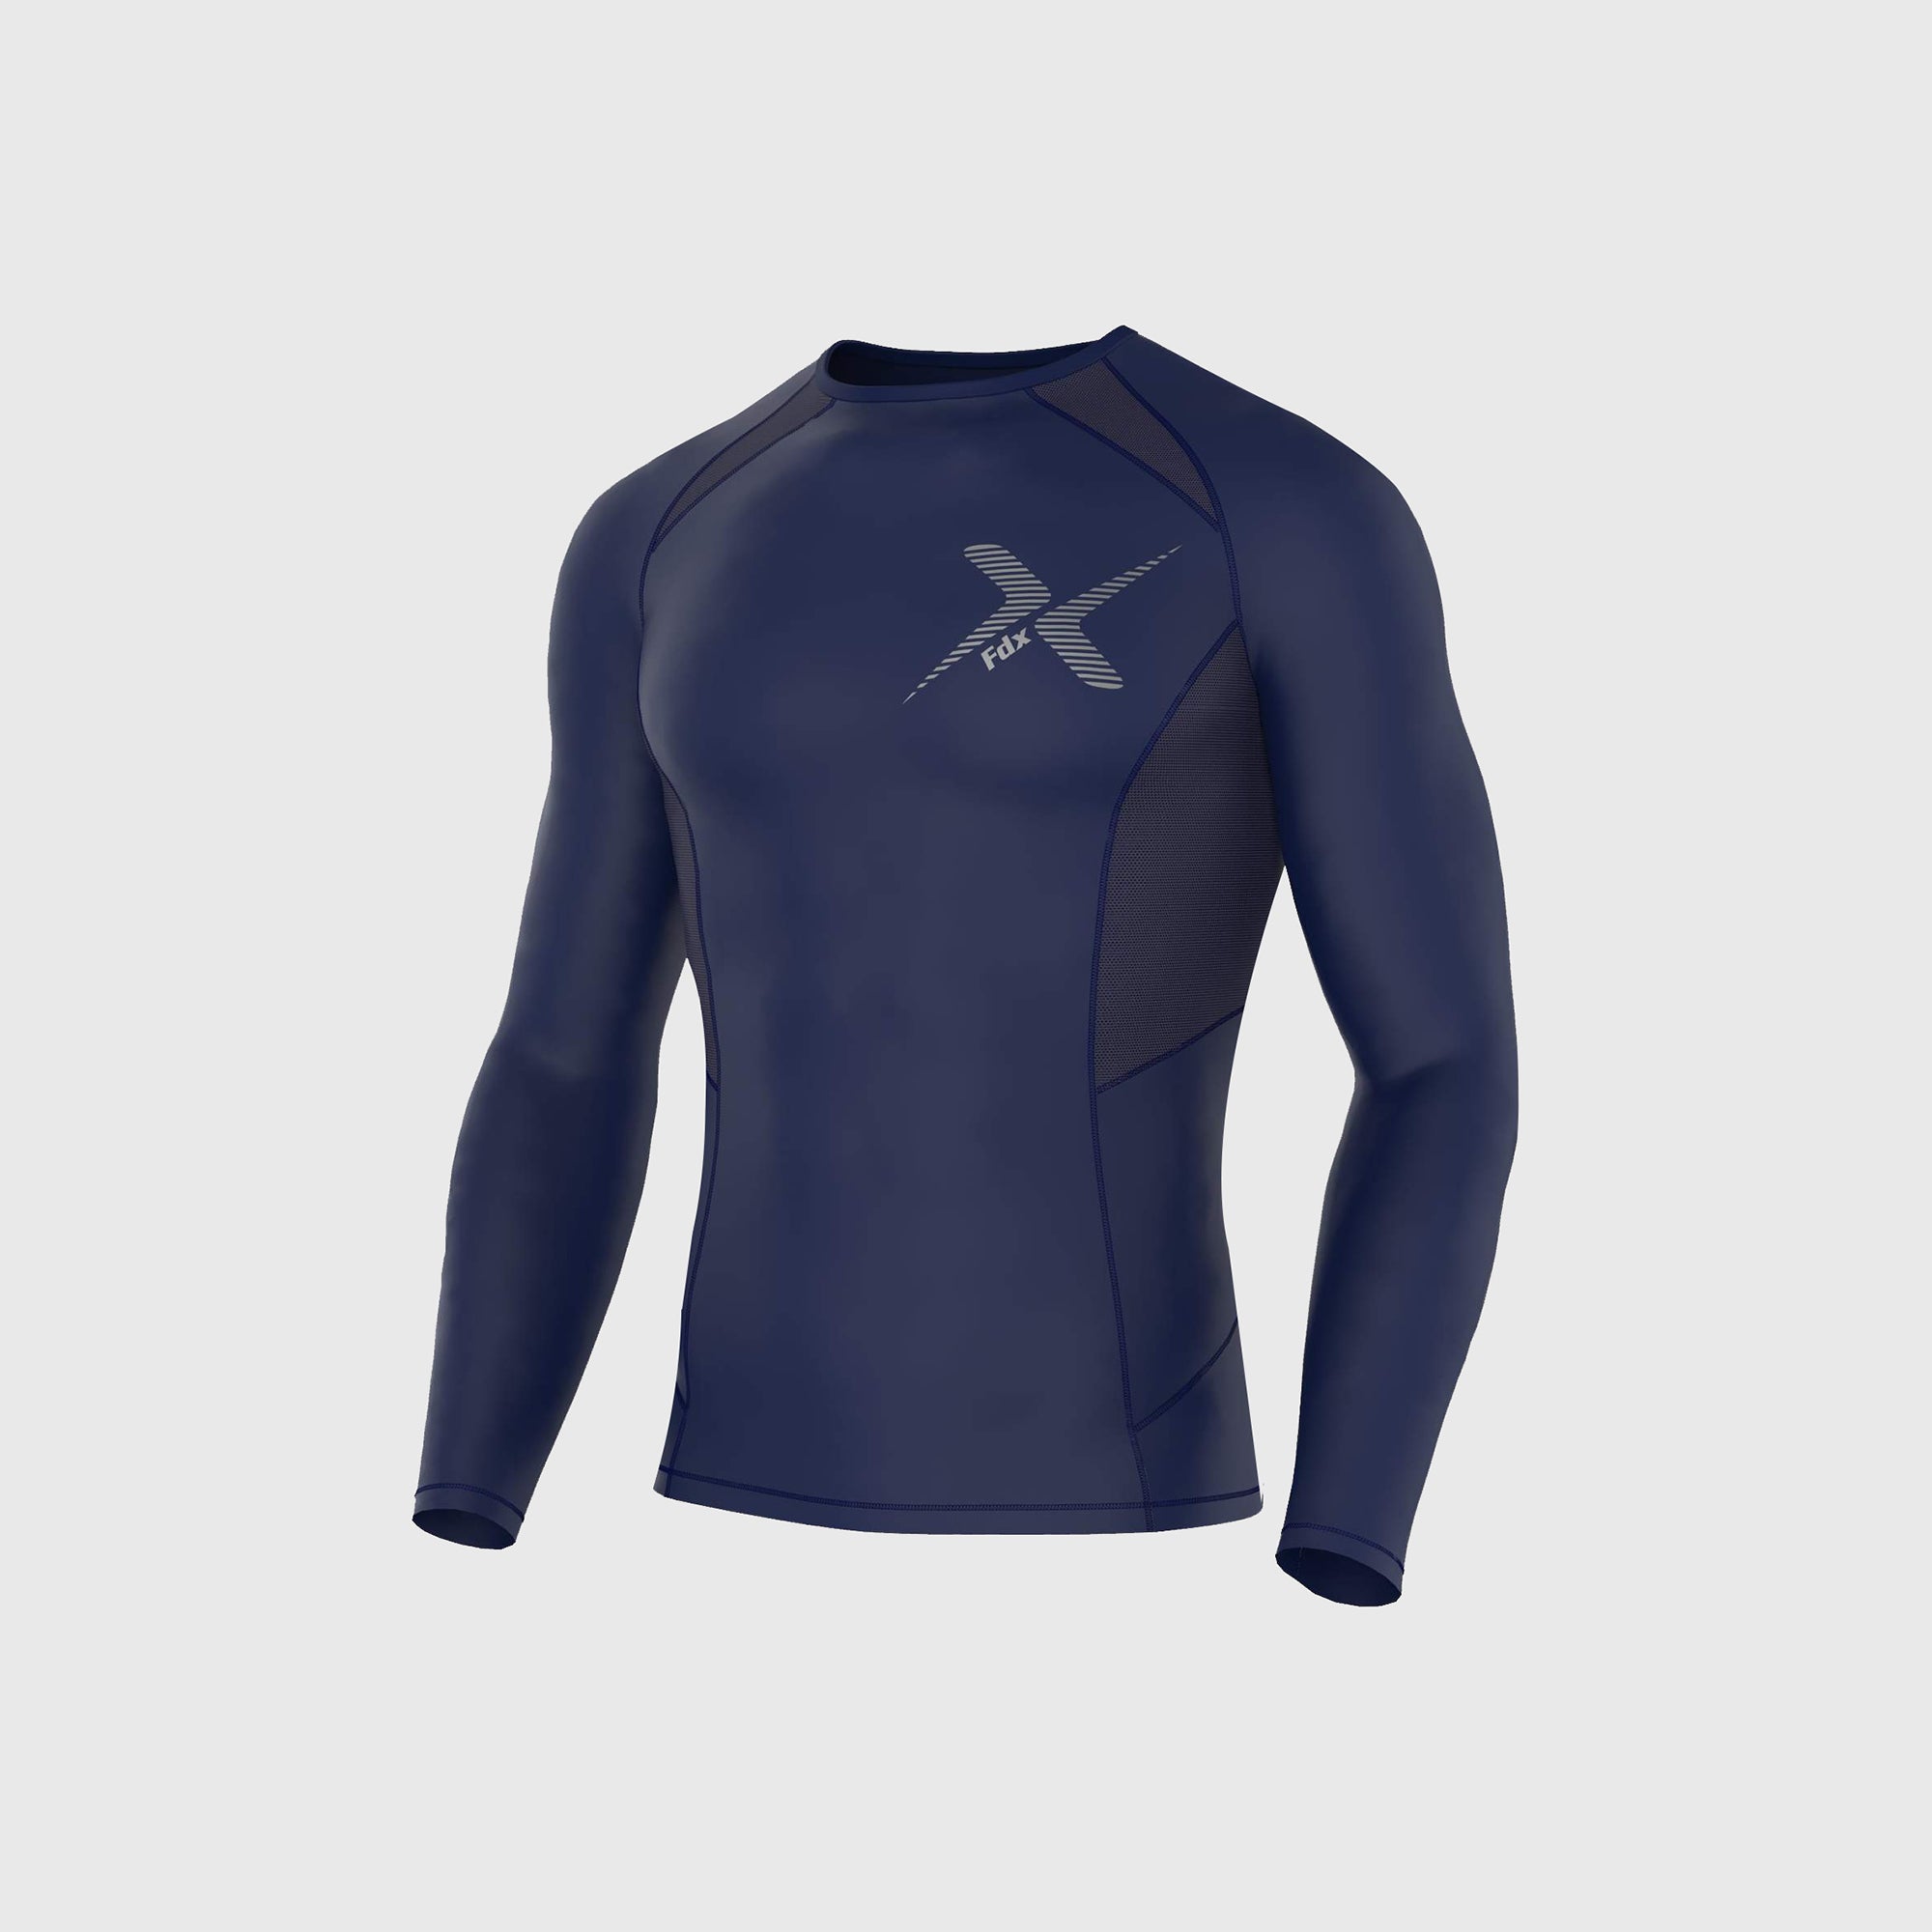 Fdx Mens Navy Blue Long Sleeve Compression Top Running Gym Workout Wear Rash Guard Stretchable Breathable - Recoil